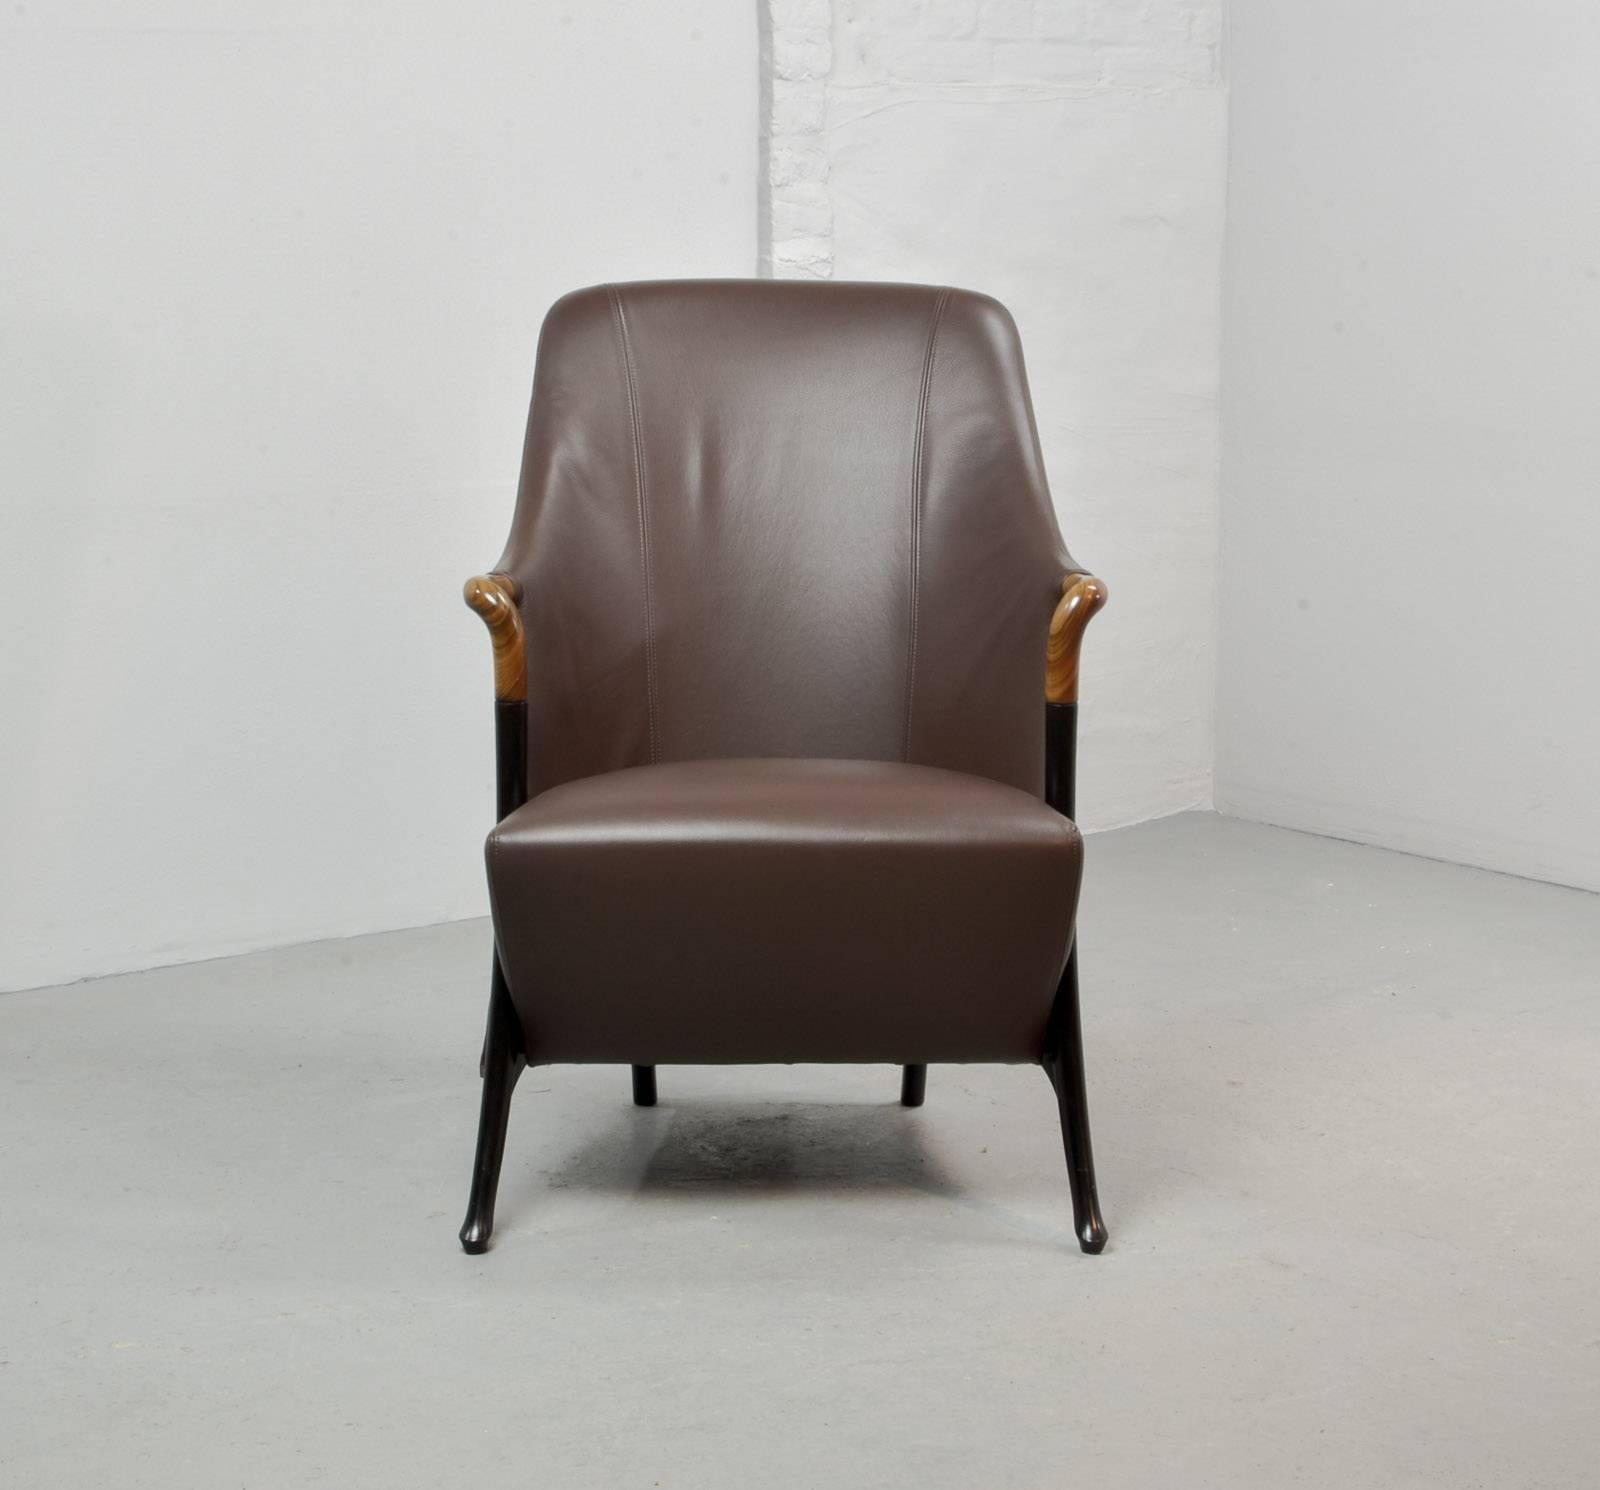 Lacquered Superb Midcentury Progetti Leather Lounge Chair by Giorgetti, 1980s